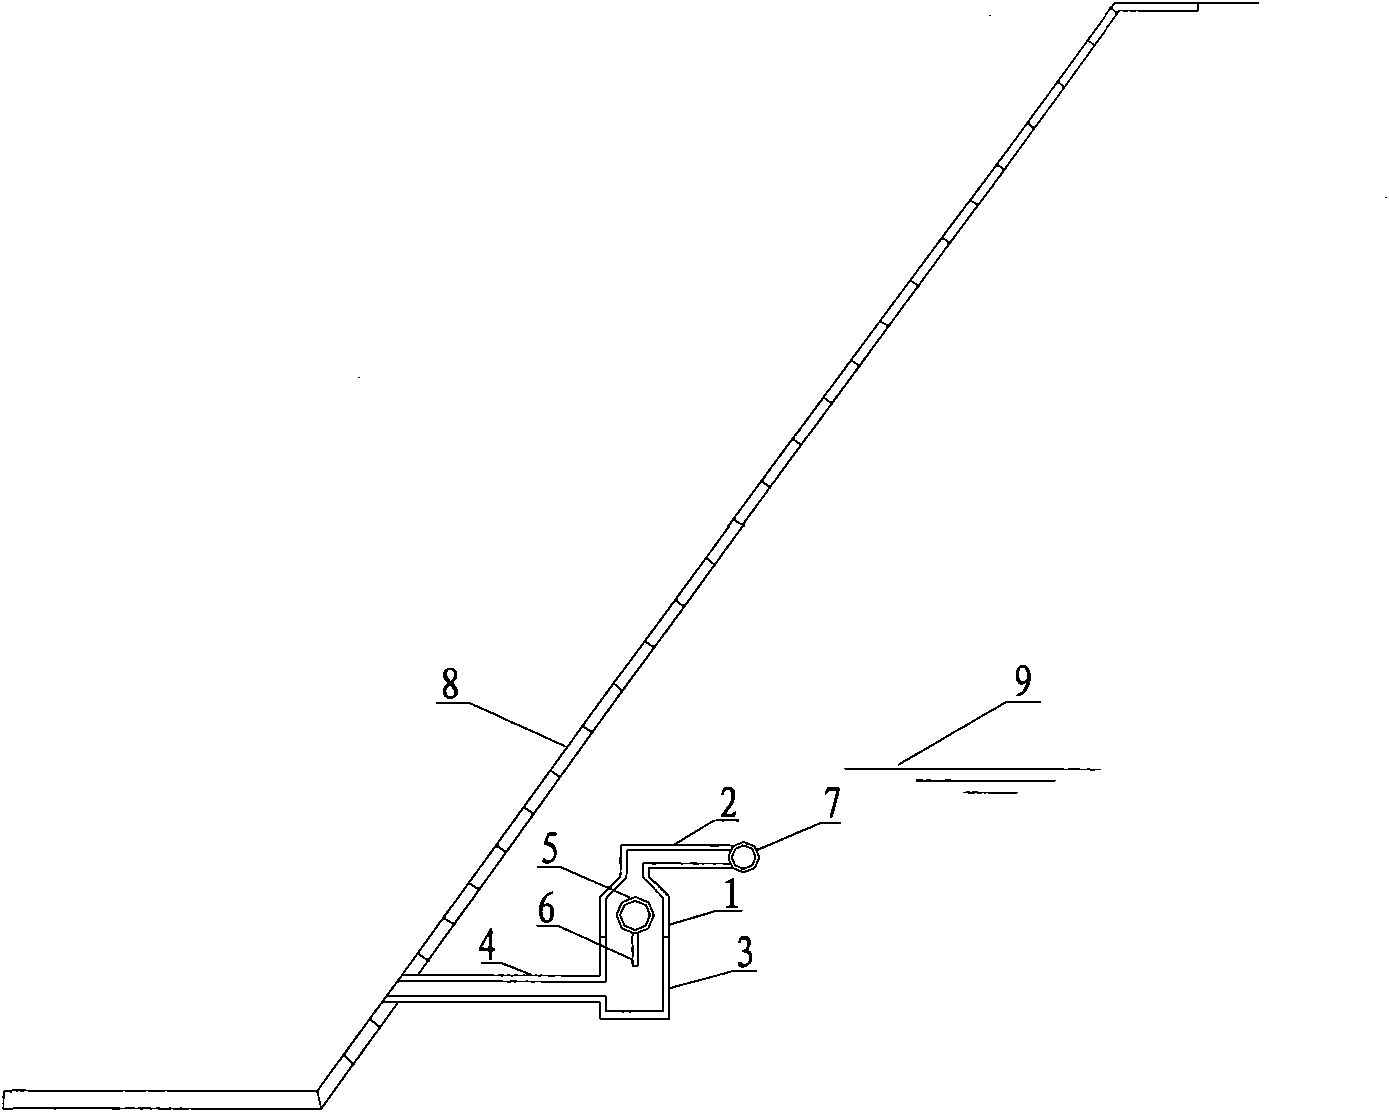 Floating ball type one-way drainage valve on slope or retaining wall